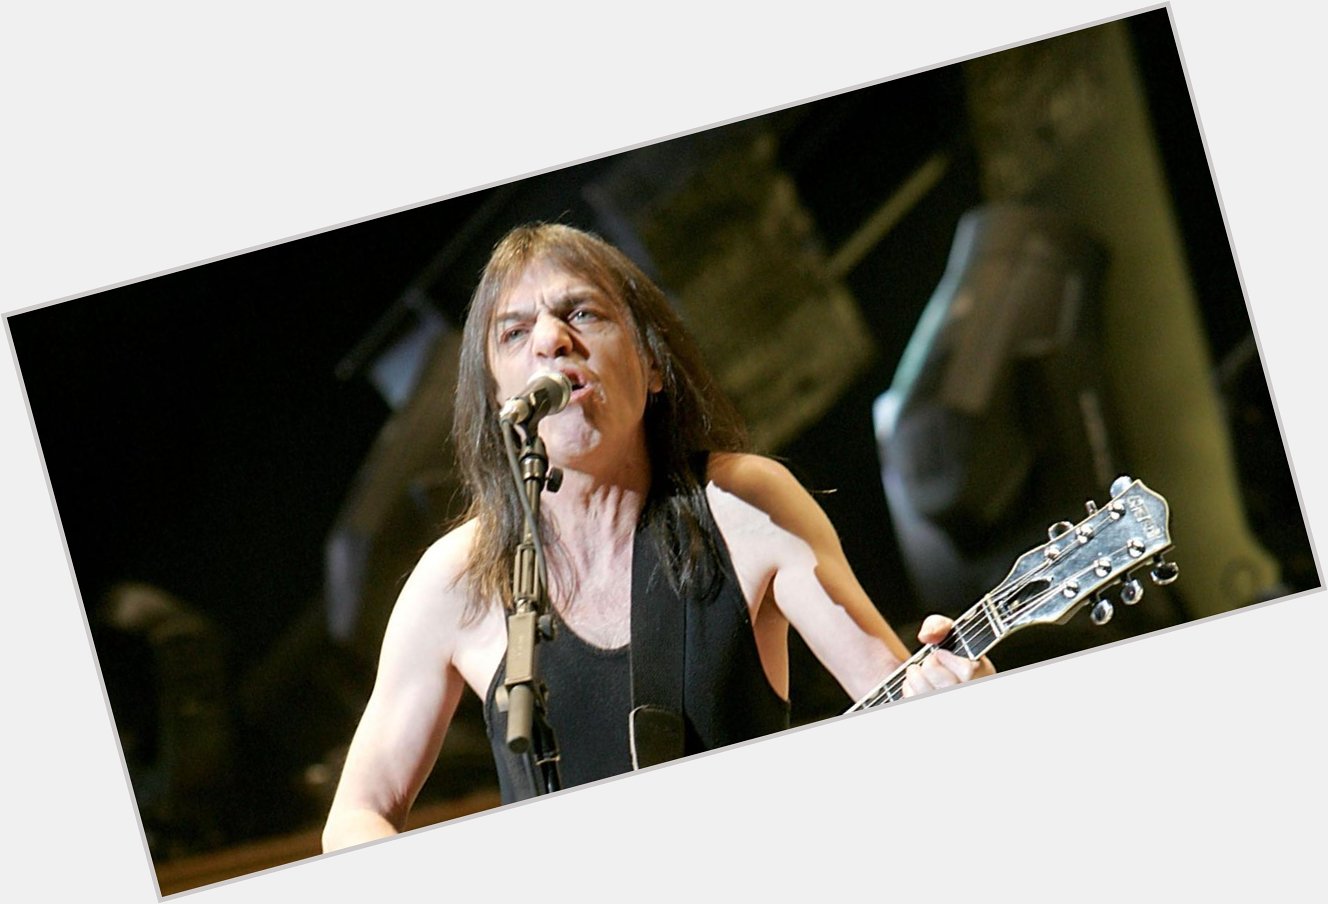 Wishing former guitarist Malcolm Young a happy 62nd birthday. From those of us about to rock, we salute him. 